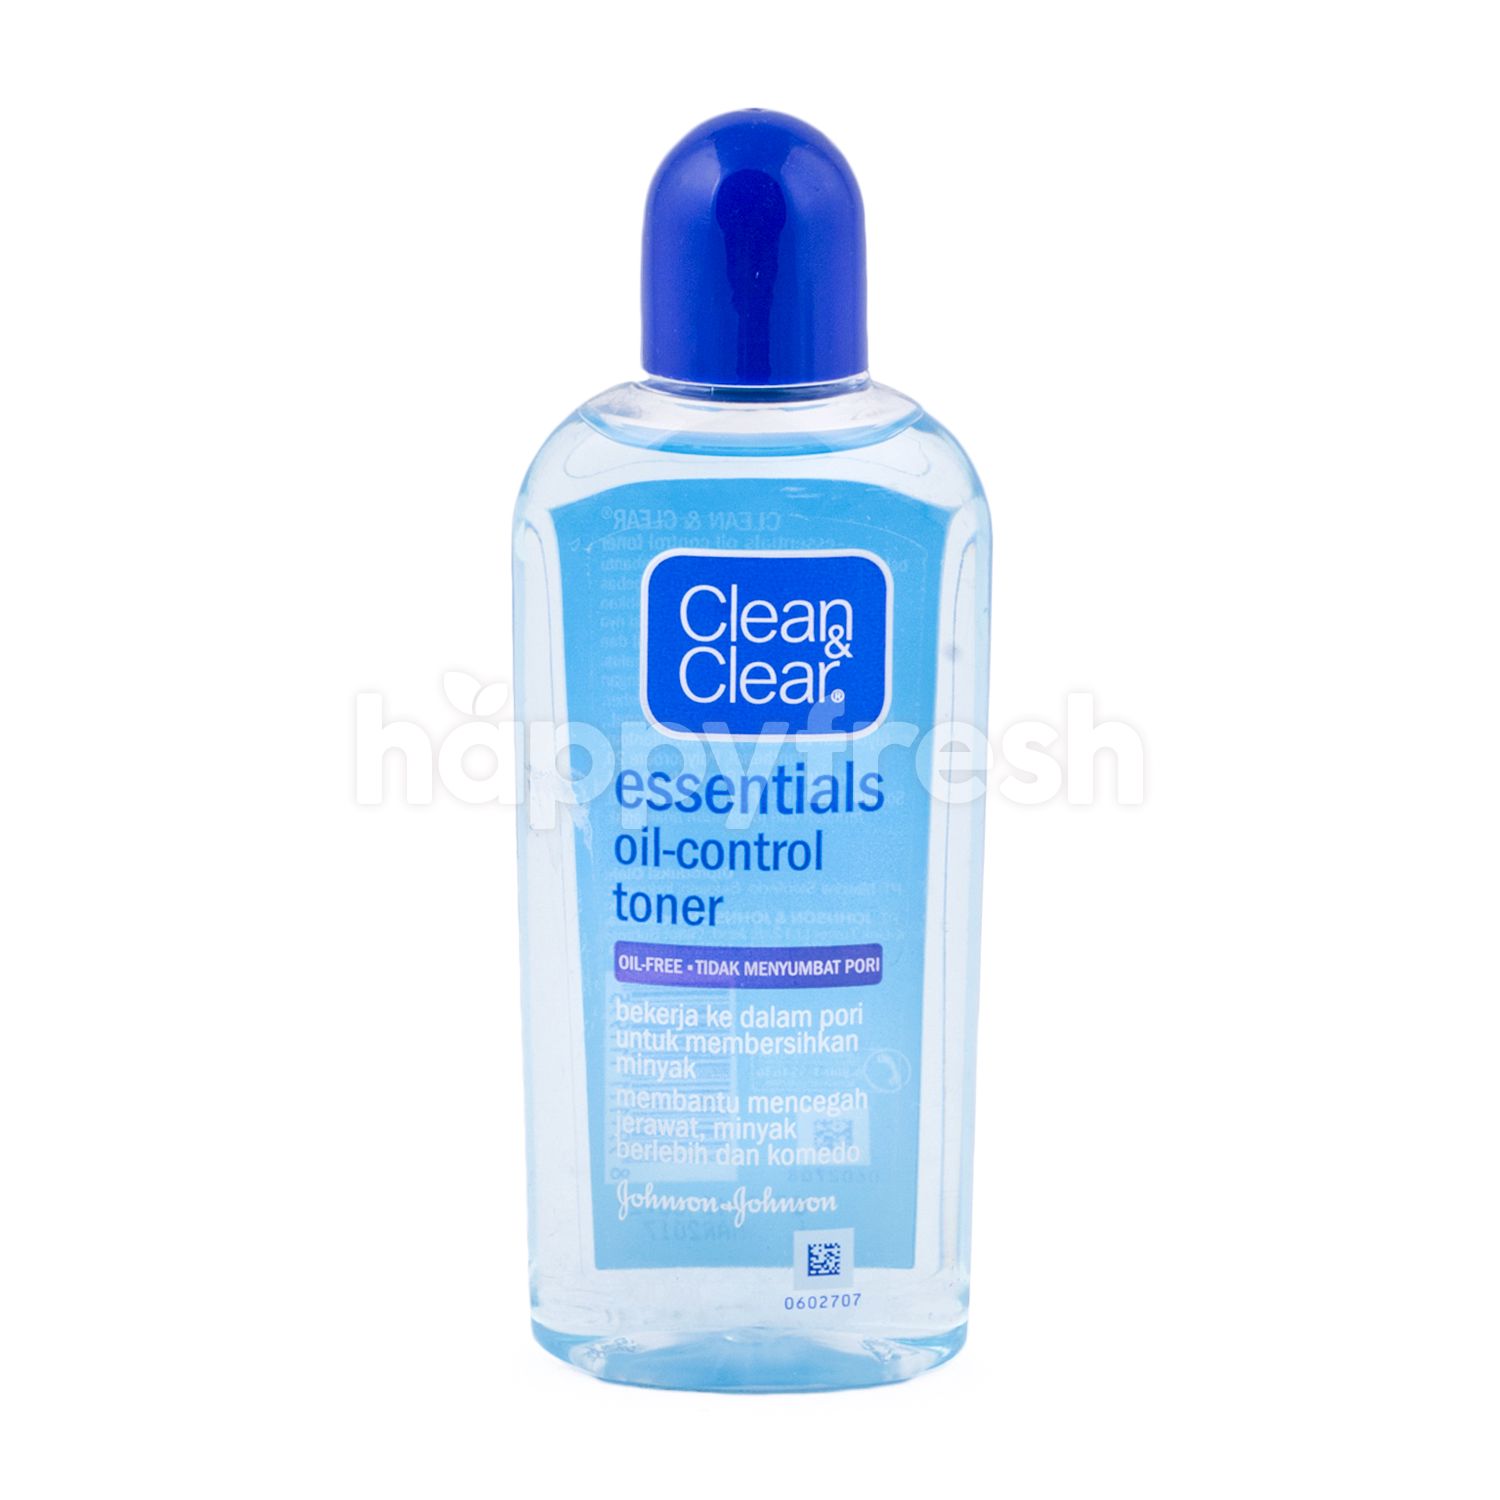 Clean and Clear Oil Control Toner. Clear control